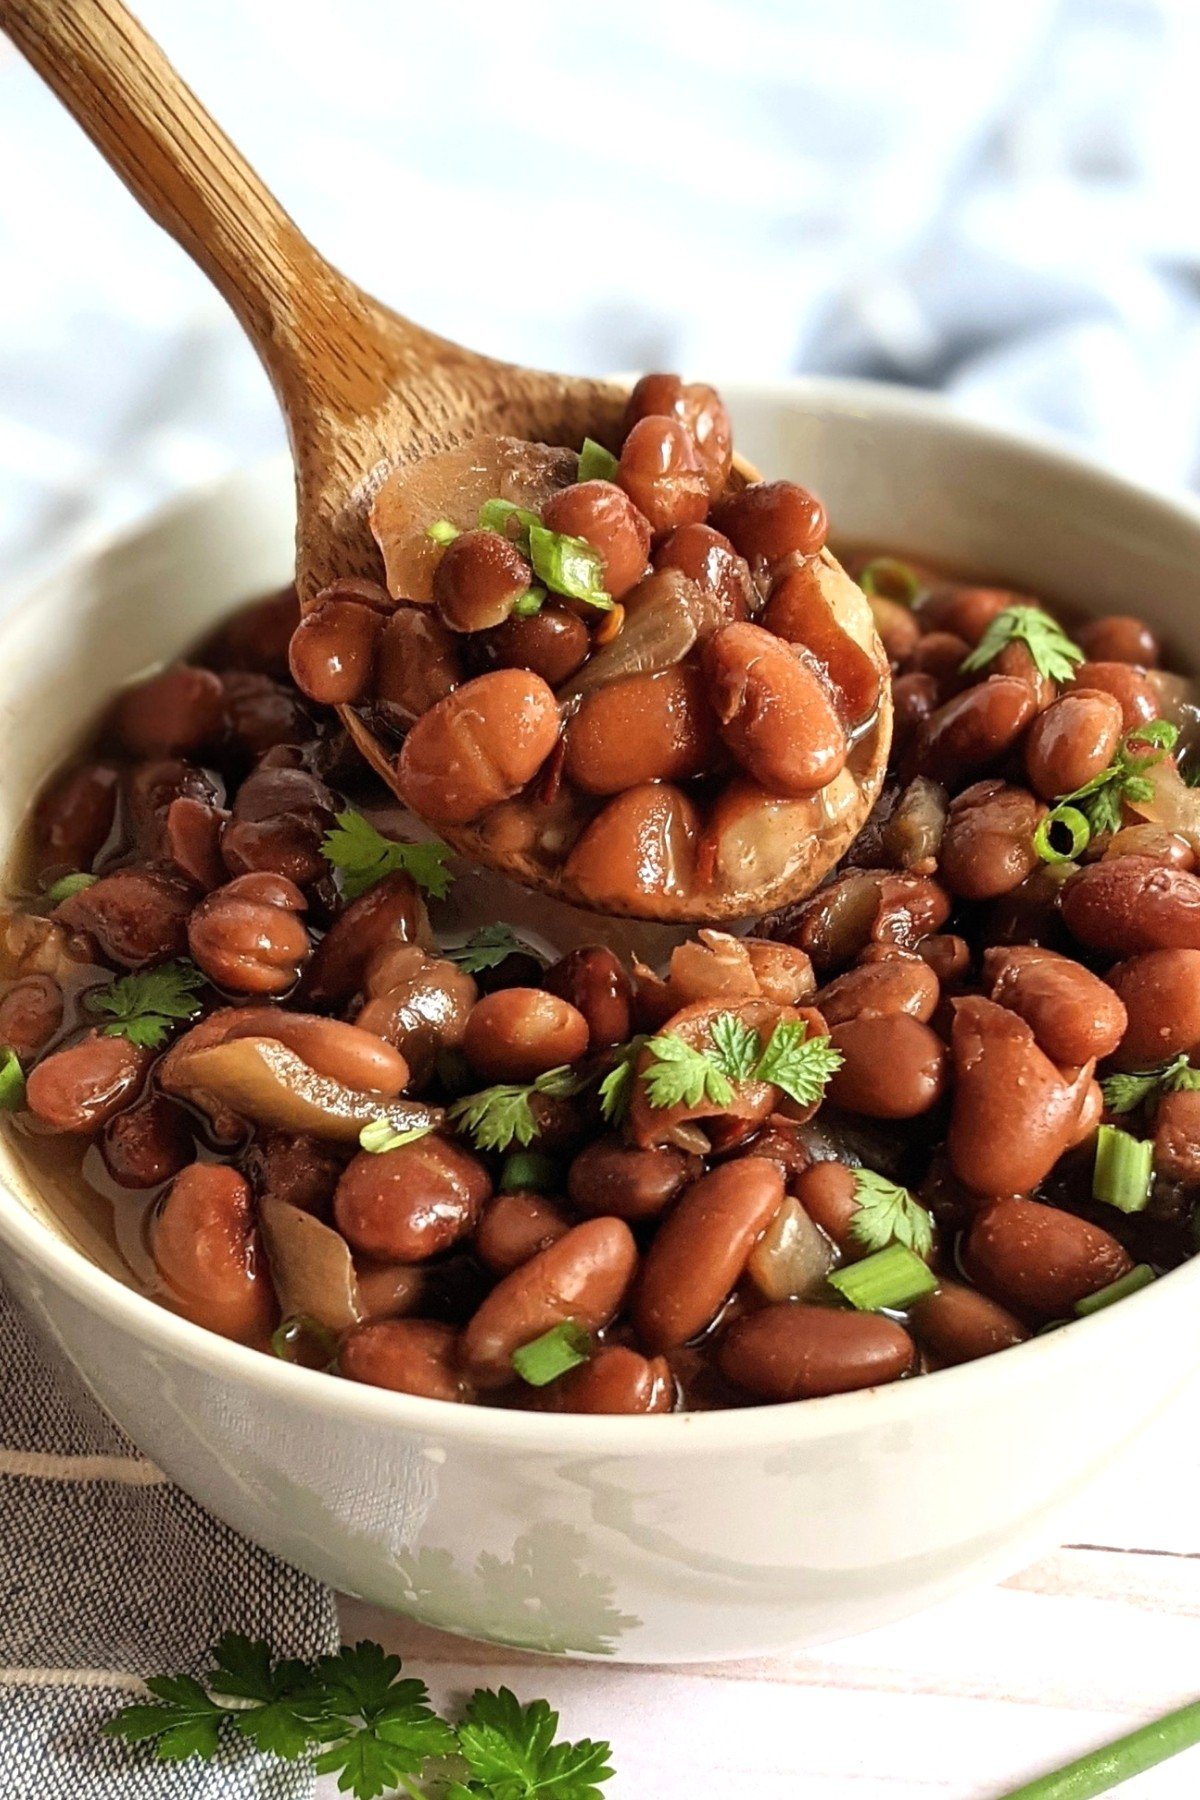 low sodium beans recipe no salt pressure cooker recipes in the instant pot pinto beans without salt beans reicpes meal prep and no salt make ahead dinners spicy mexican beans without salt